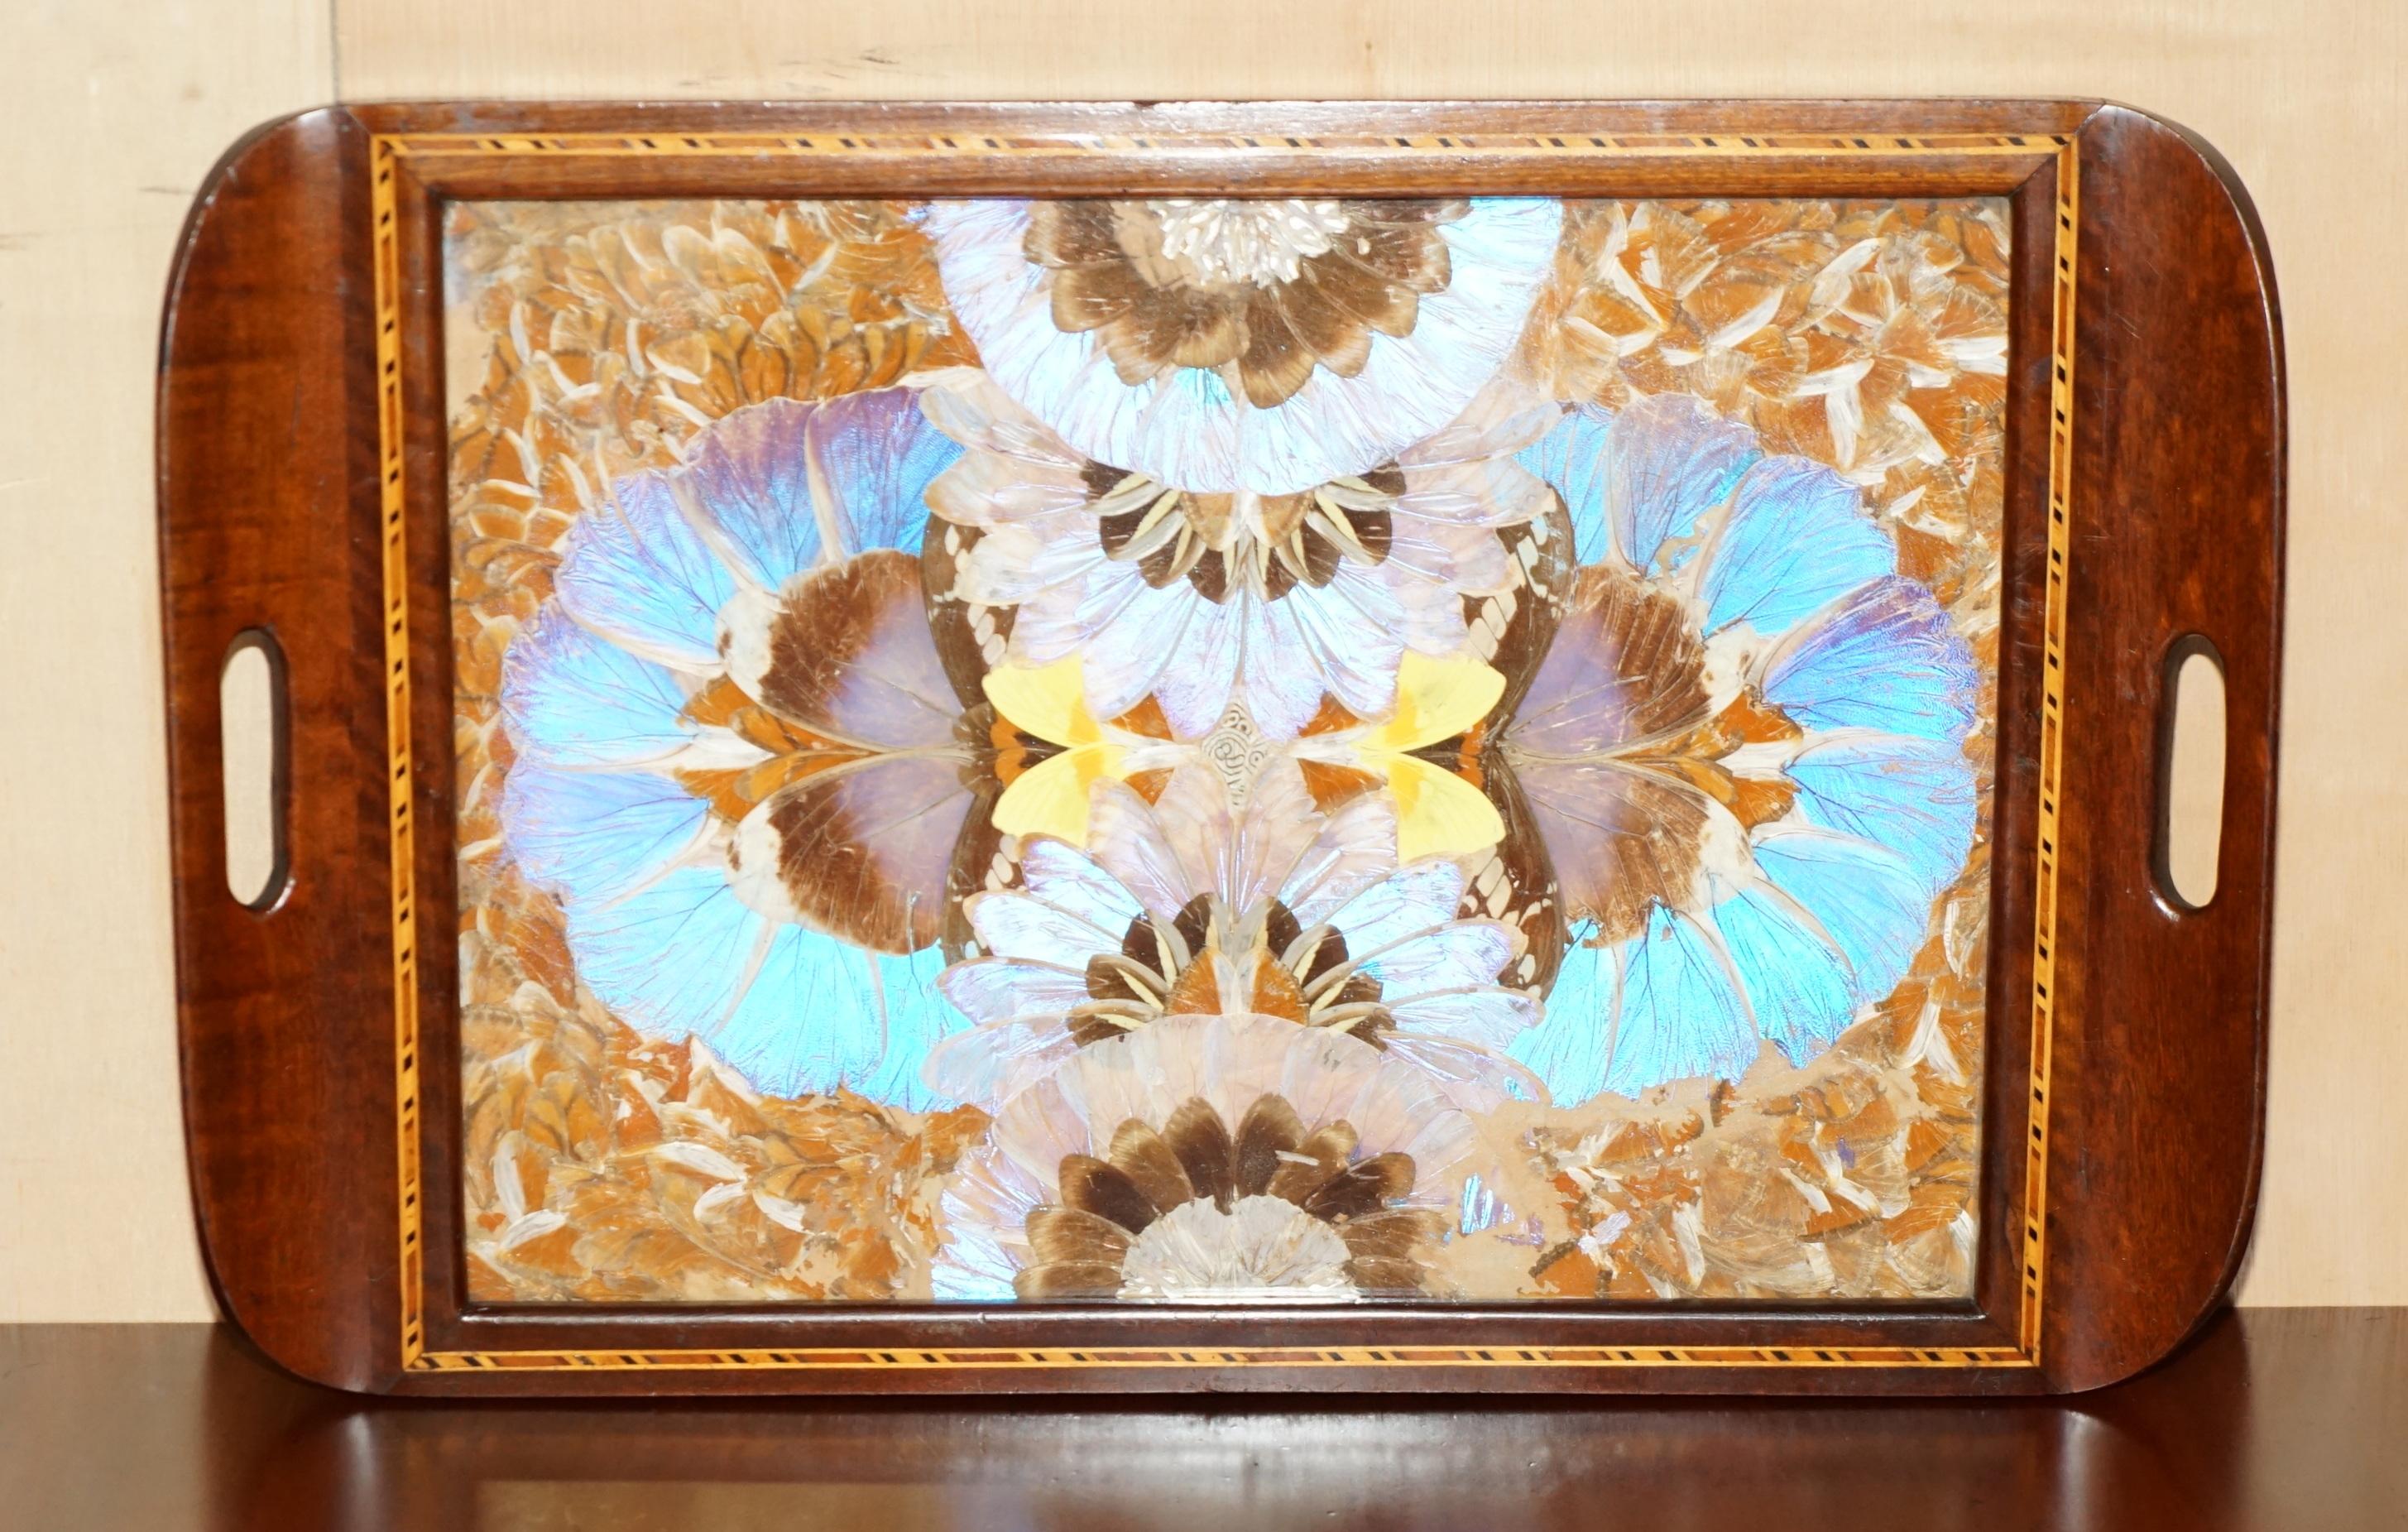 Royal House Antiques

Royal House Antiques is delighted to offer for sale this exquisite very well made Brazilian Rosewood butlers tray with pressed butterfly wings retailed in Rio De Janeiro for the export market

This is a pretty much the finest